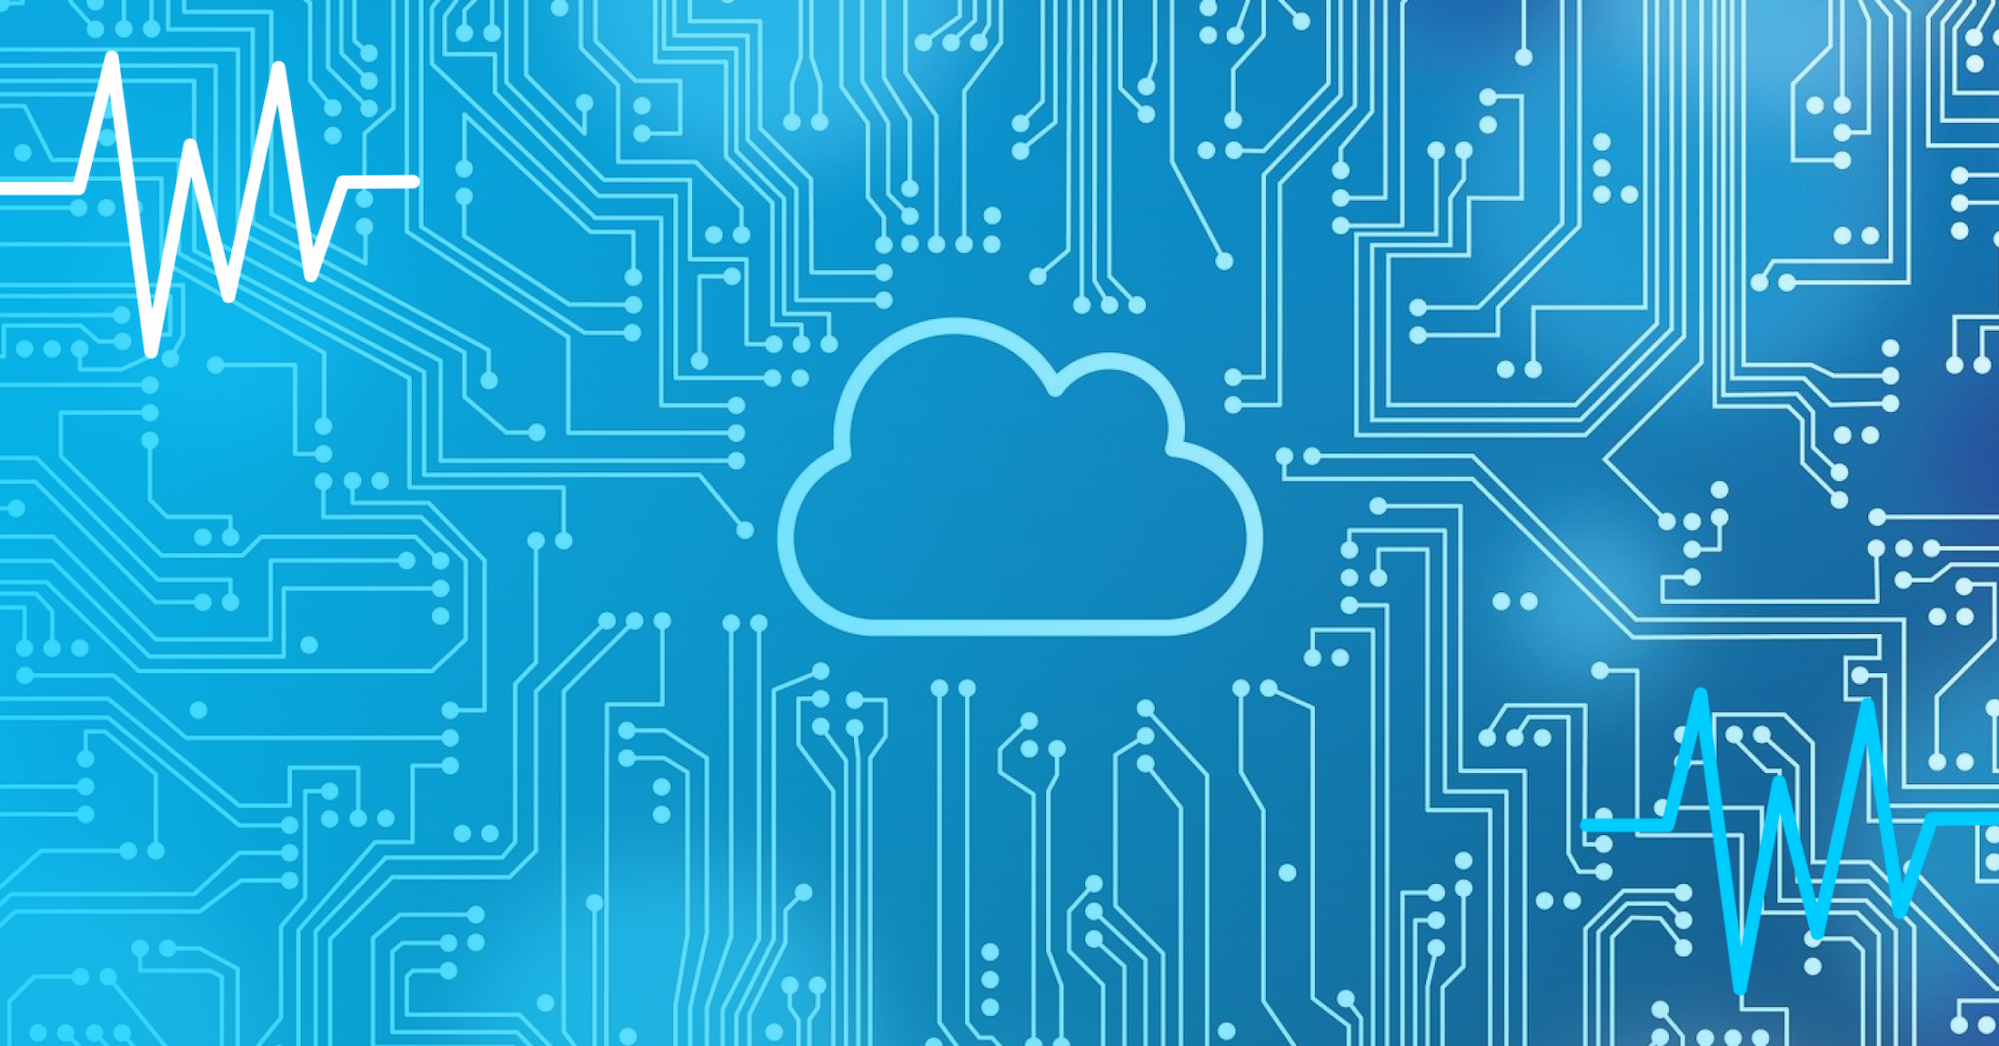 A banner illustrating a cloud surrounded by digital nodes